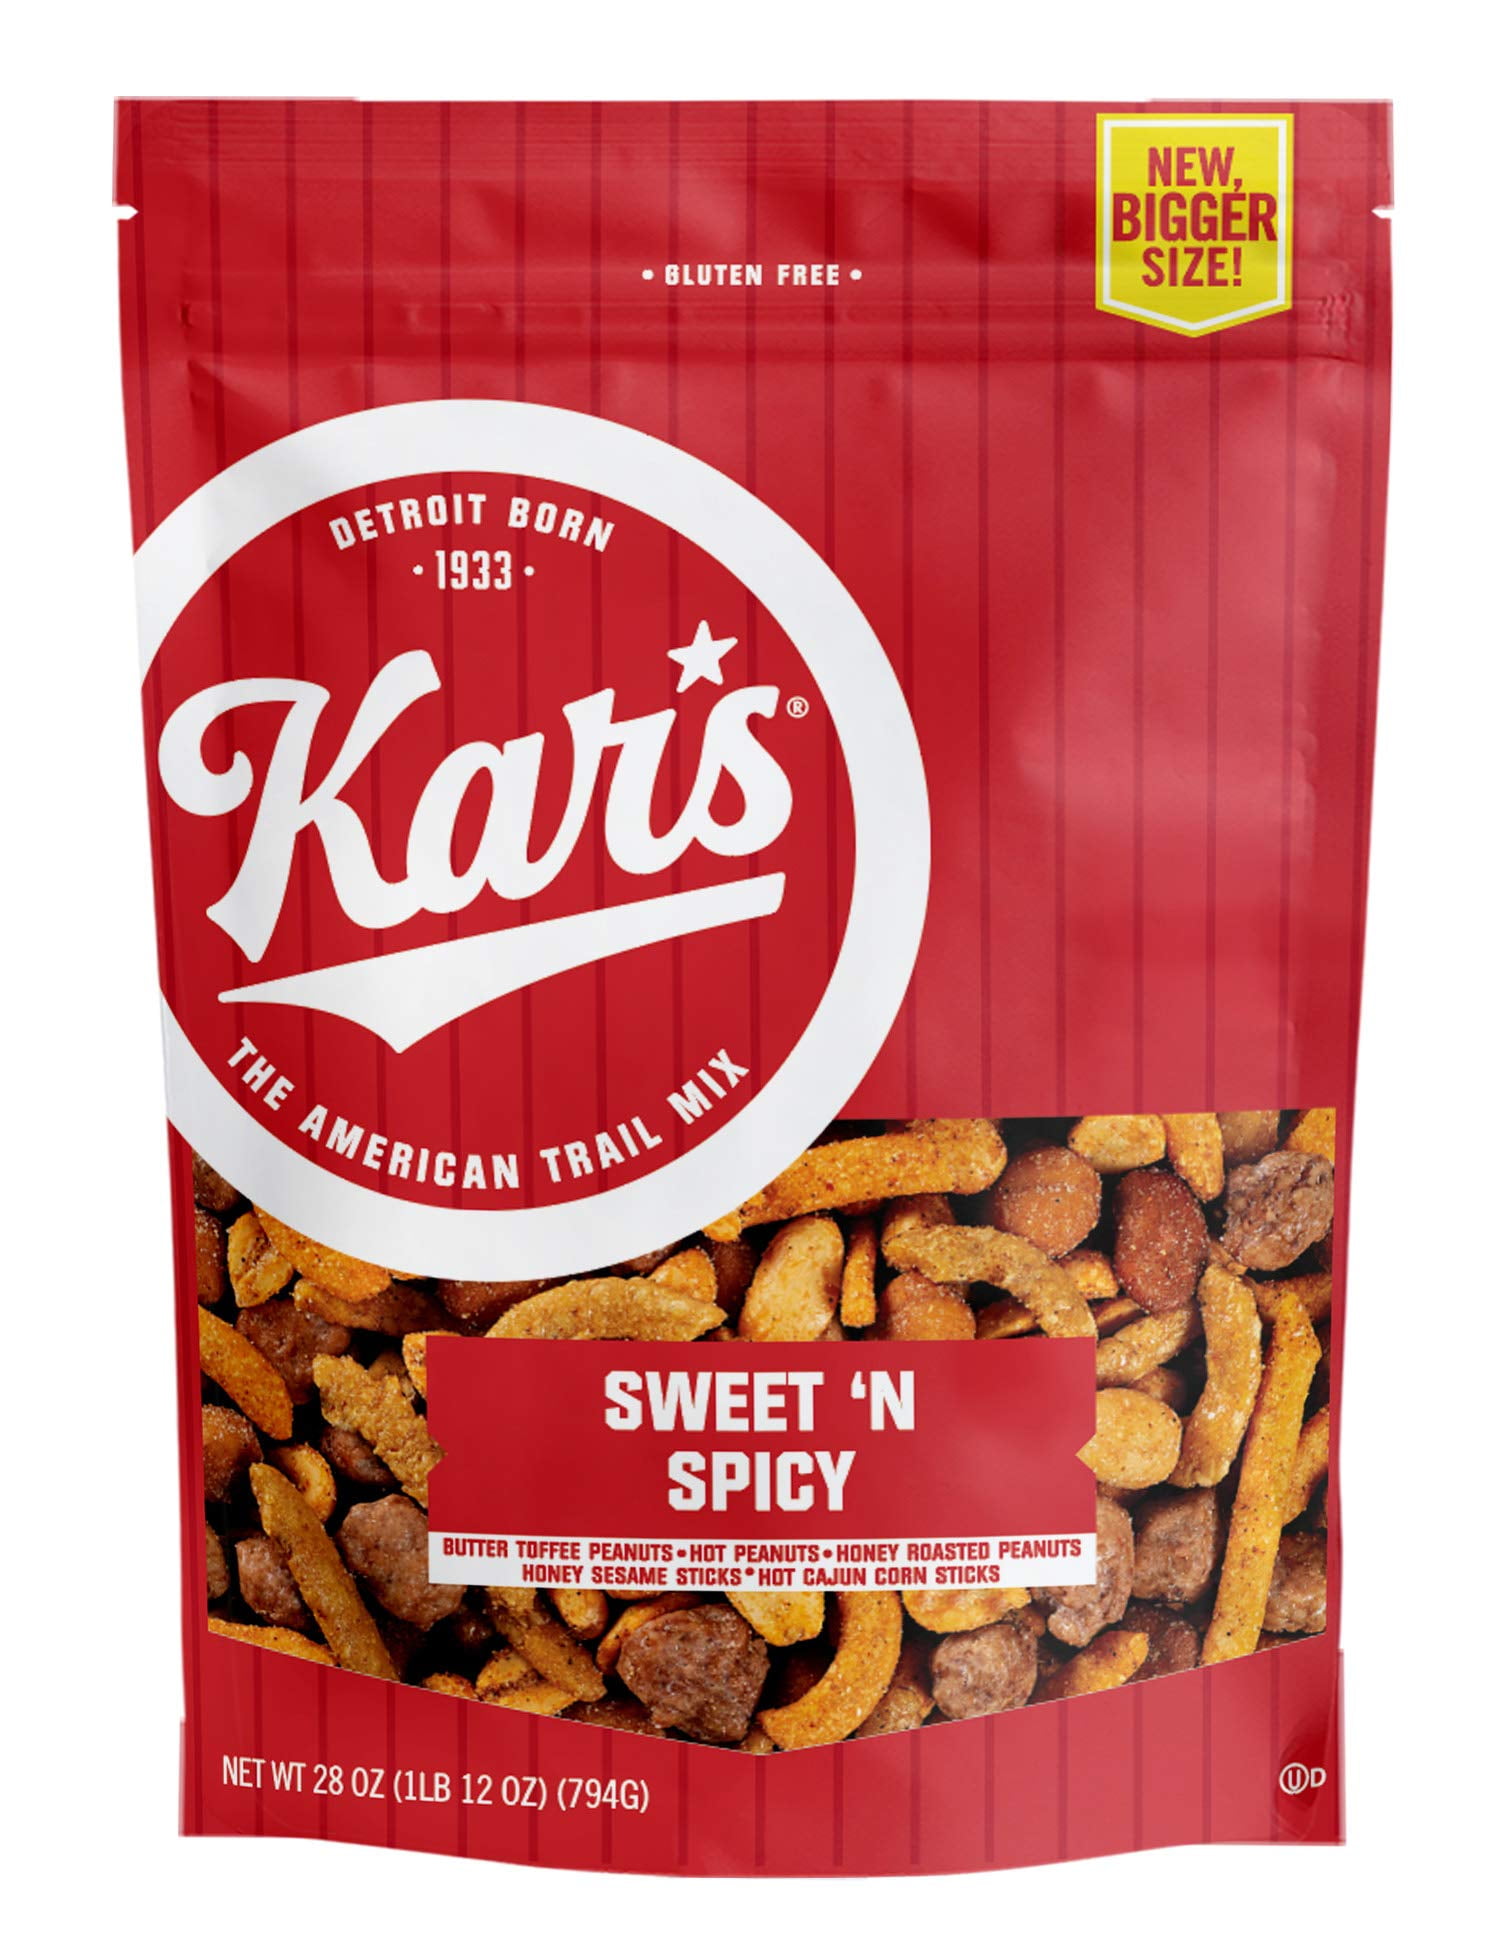 Kar’s Nuts Sweet 'N Spicy Trail Mix, 28 oz - Resealable Pouch (Pack of 1),  Gluten-Free Snack Mix